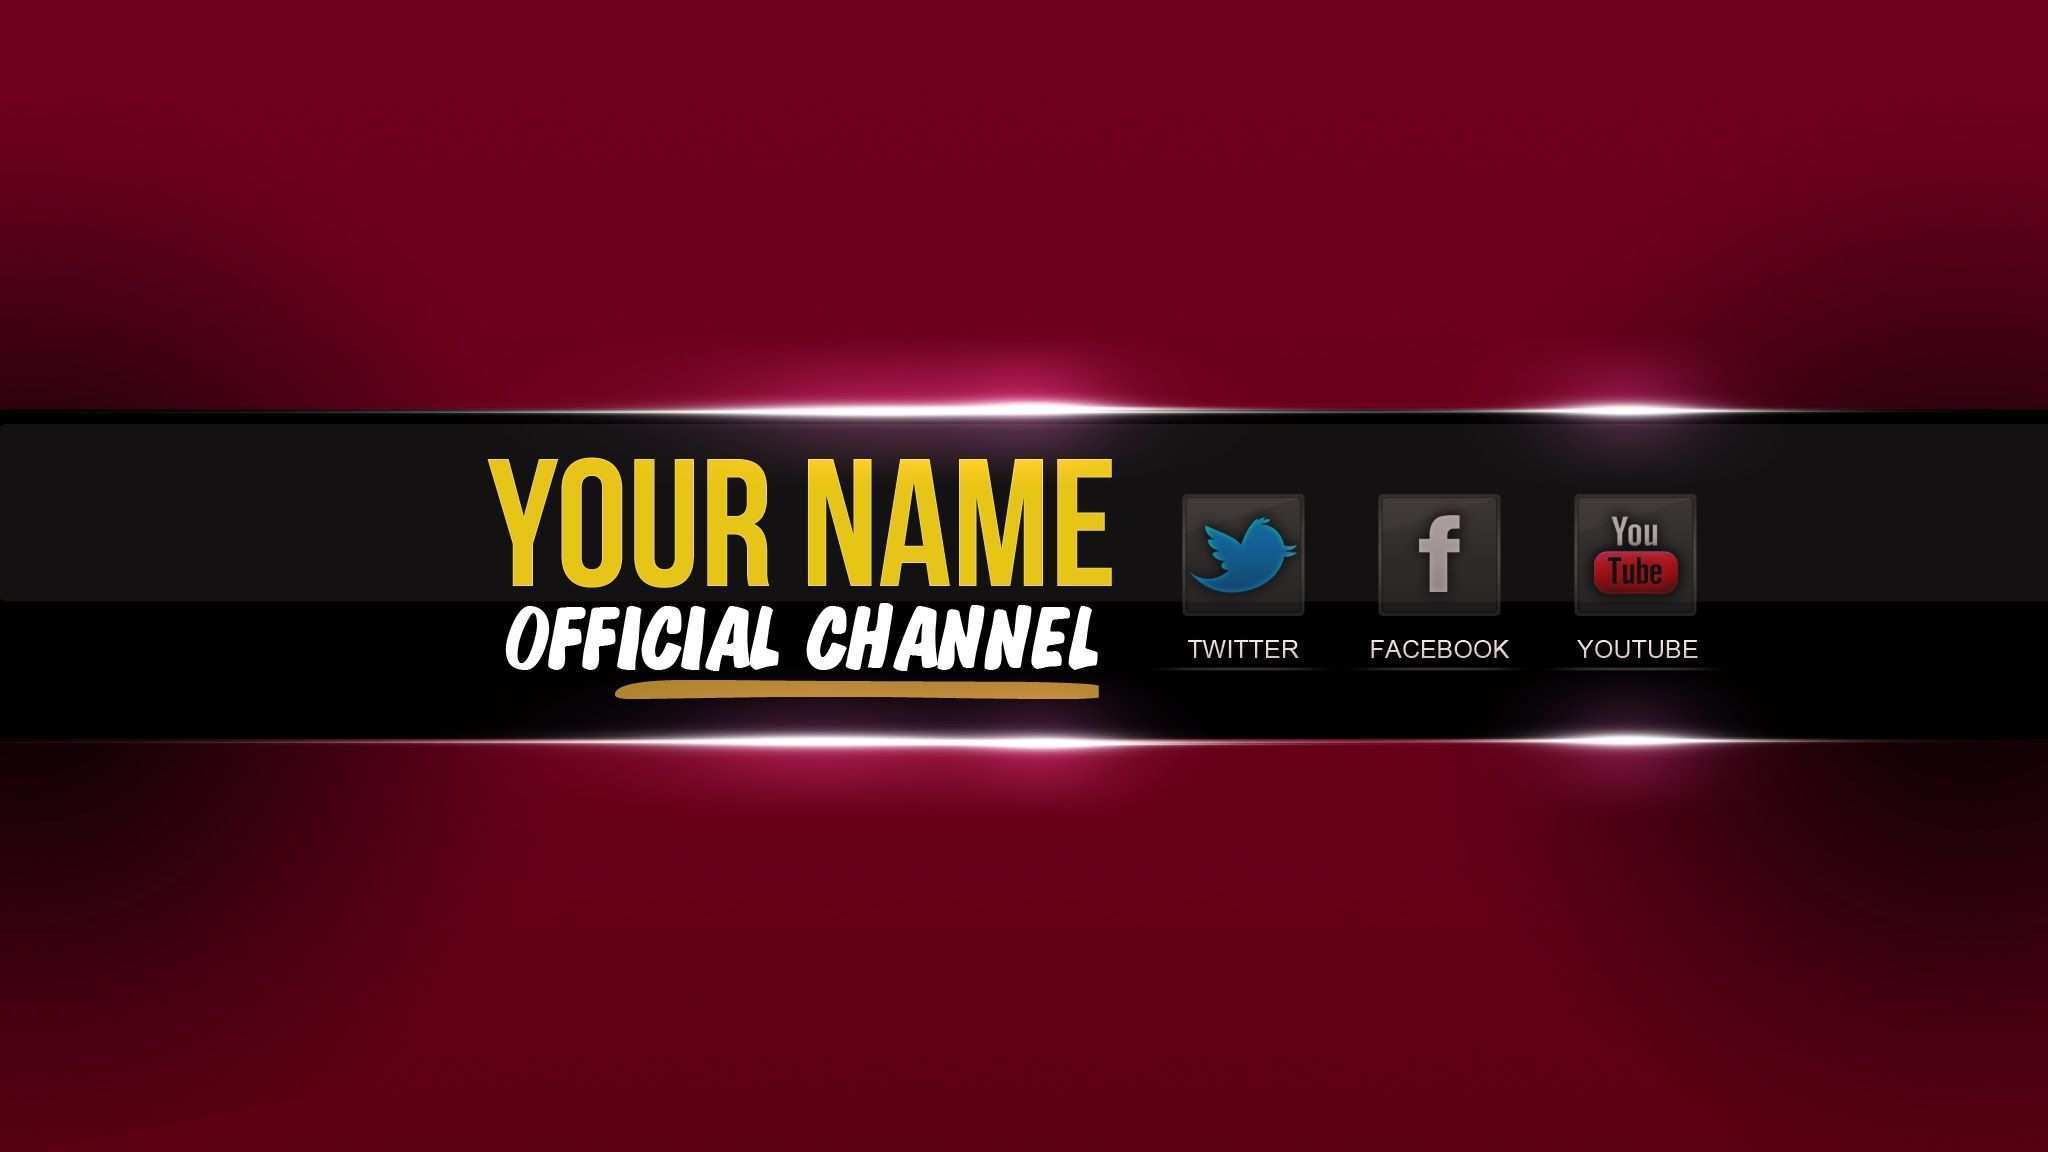 Youtube Banners Youtube Banner Template Youtube Banners Youtube Banner Backgrounds